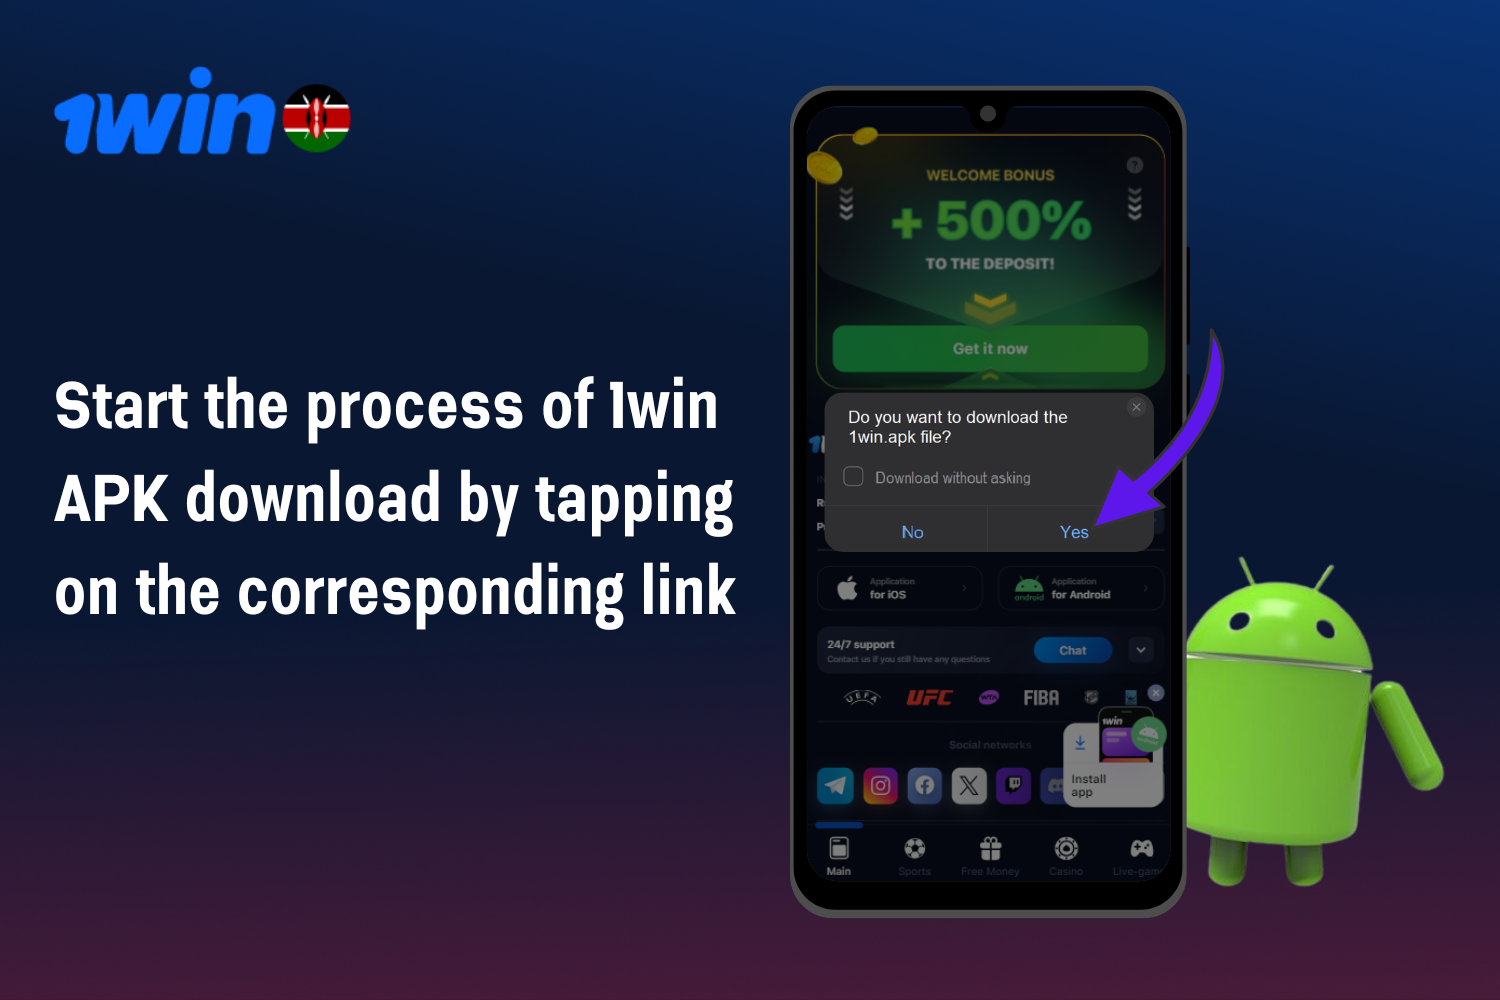 In order to download the application, users from Kenya need to confirm the process of downloading the 1win APK by clicking on the appropriate link